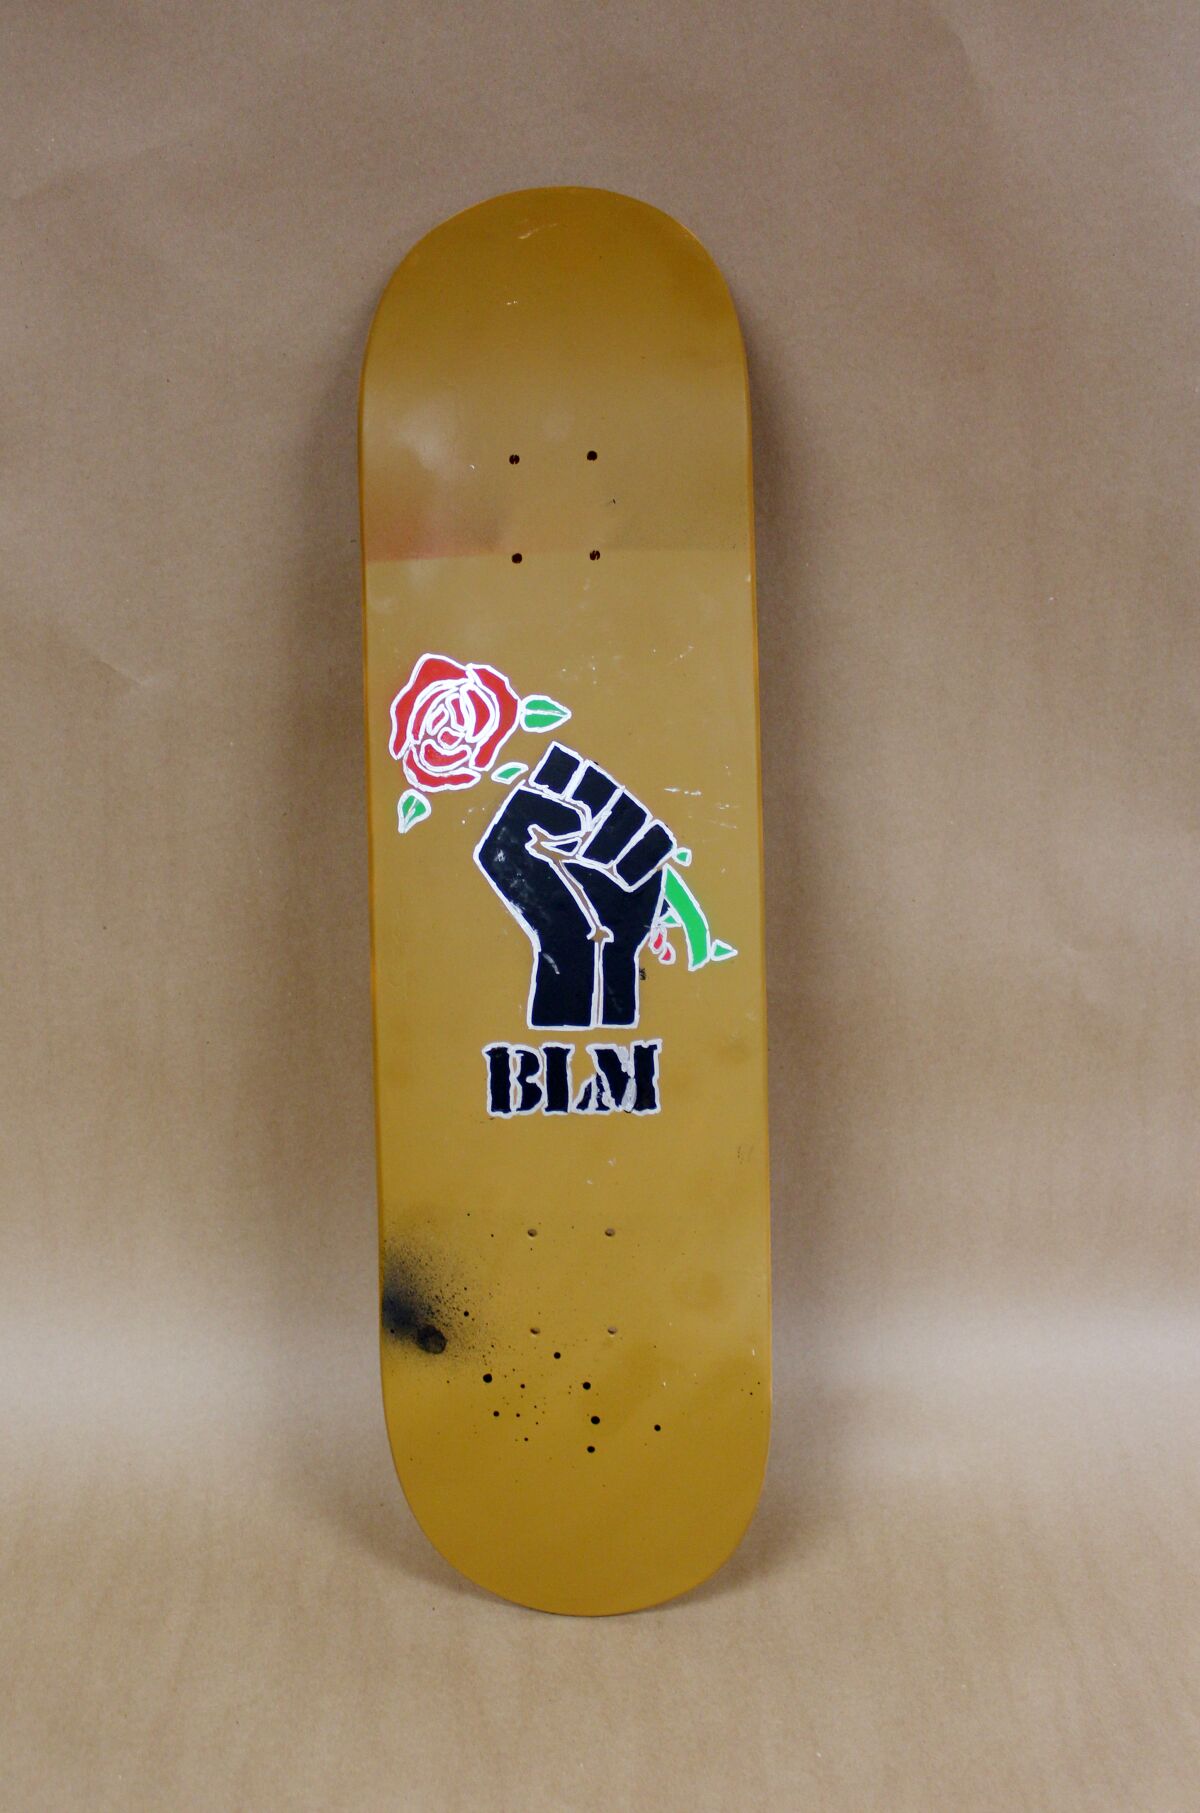 A skateboard with a clenched, raised fist holding a red rose above the letters BLM.